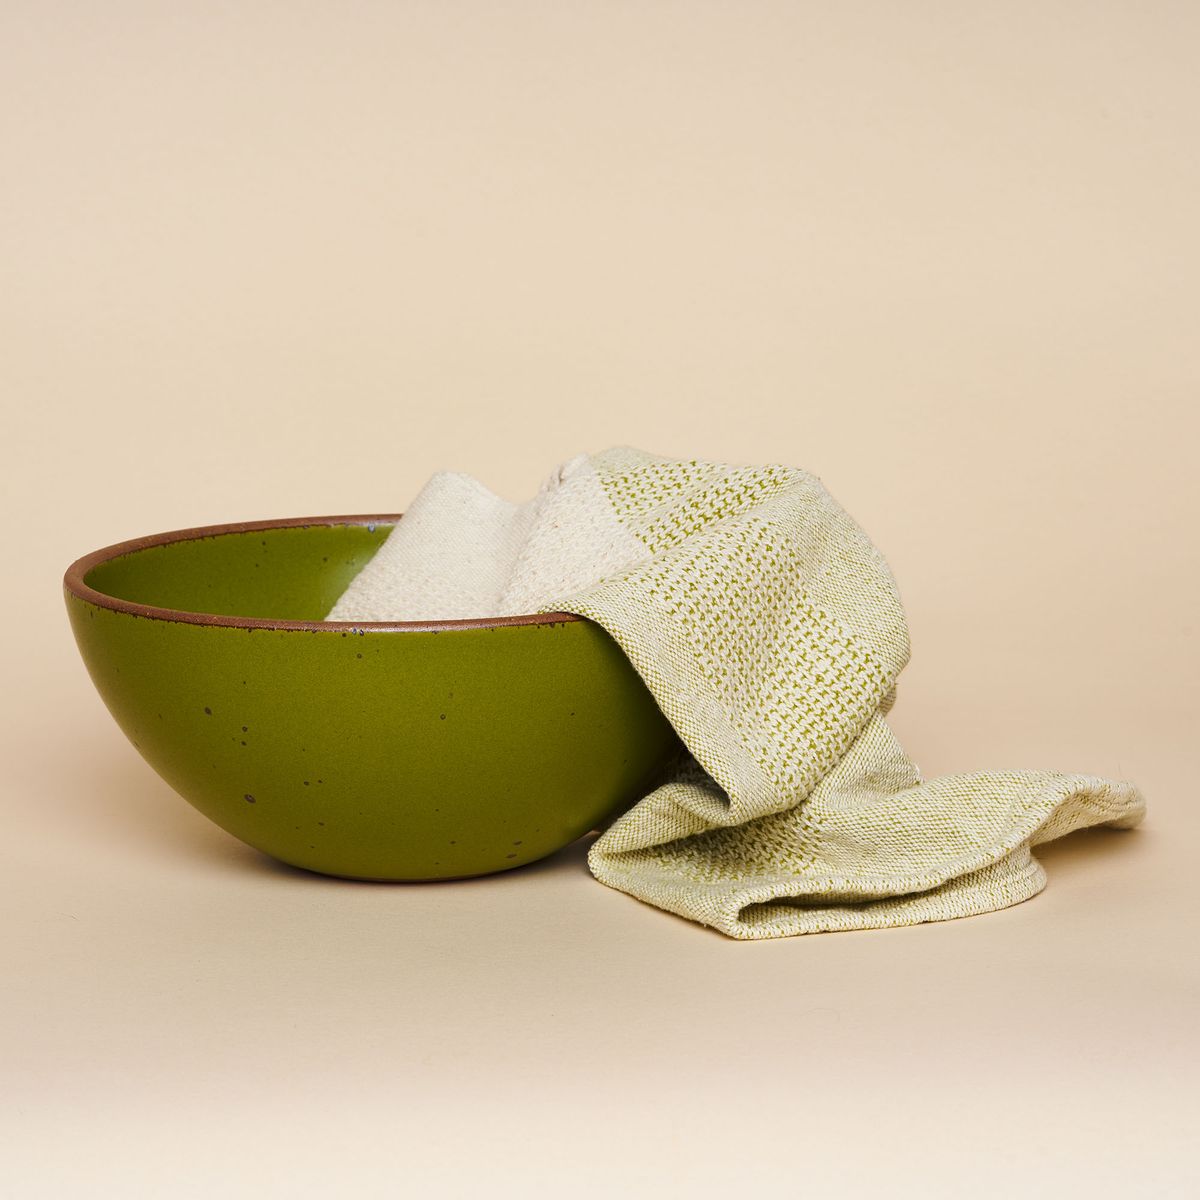 A mossy-green pottery bowl with a matching green-and-natural fiber handwoven tea cloth whimsically placed within it